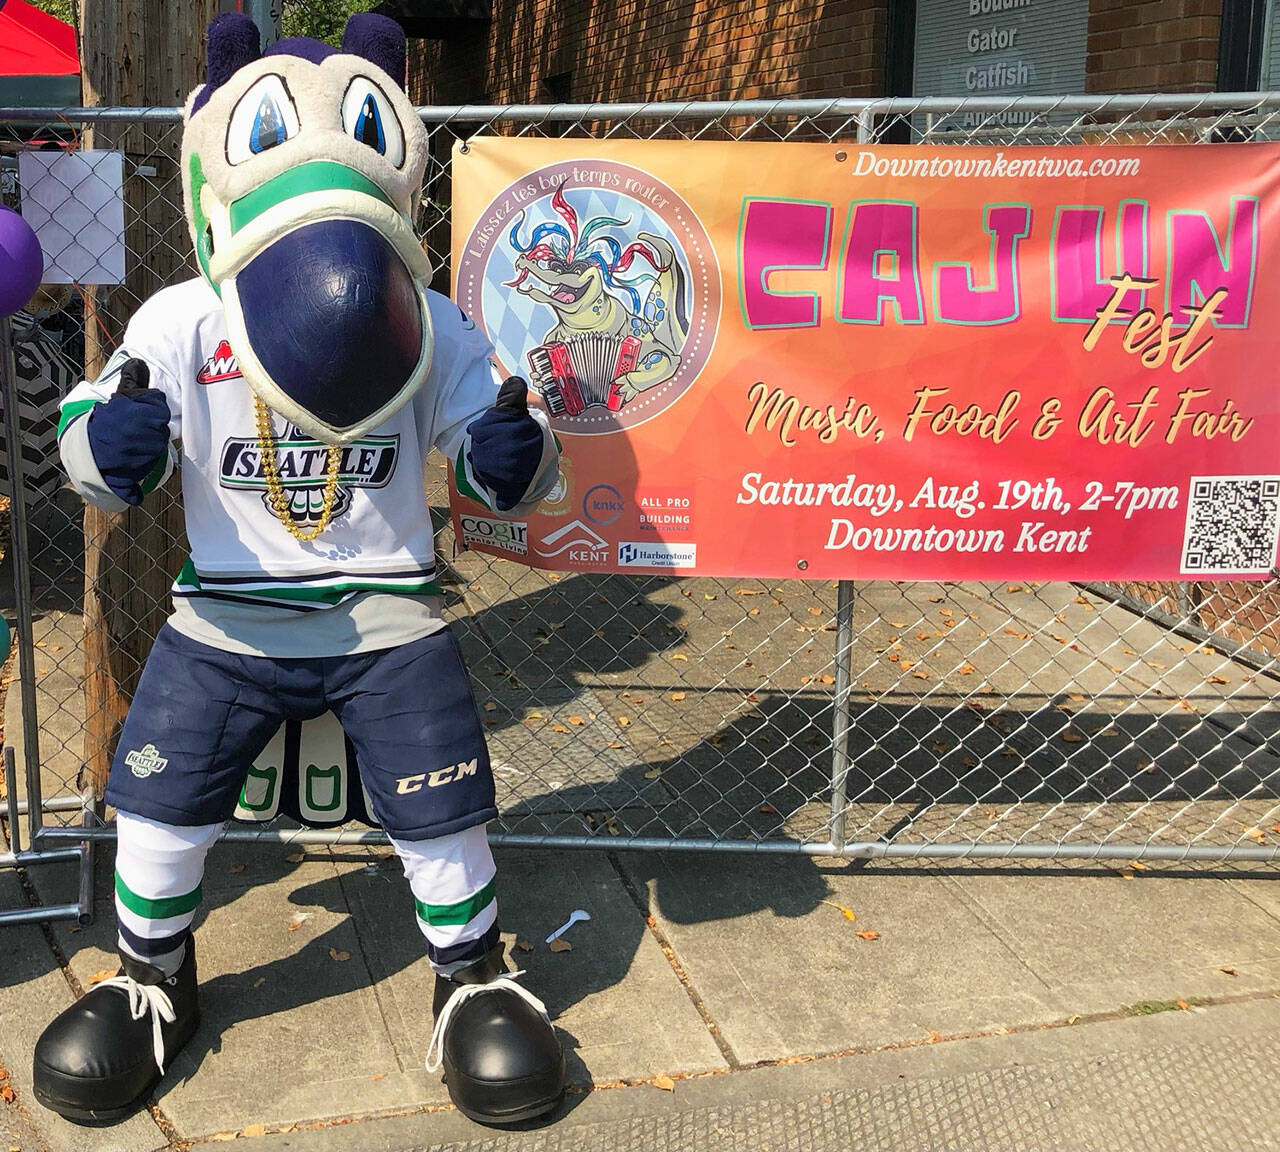 Cool Bird, seen here at the Cajun Fest last month in Kent, will appear Saturday, Sept. 16 at the Greater Kent Historical Society Museum to celebrate the opening of a Seattle Thunderbirds junior hockey team exhibit. COURTESY PHOTO, Seattle Thunderbirds